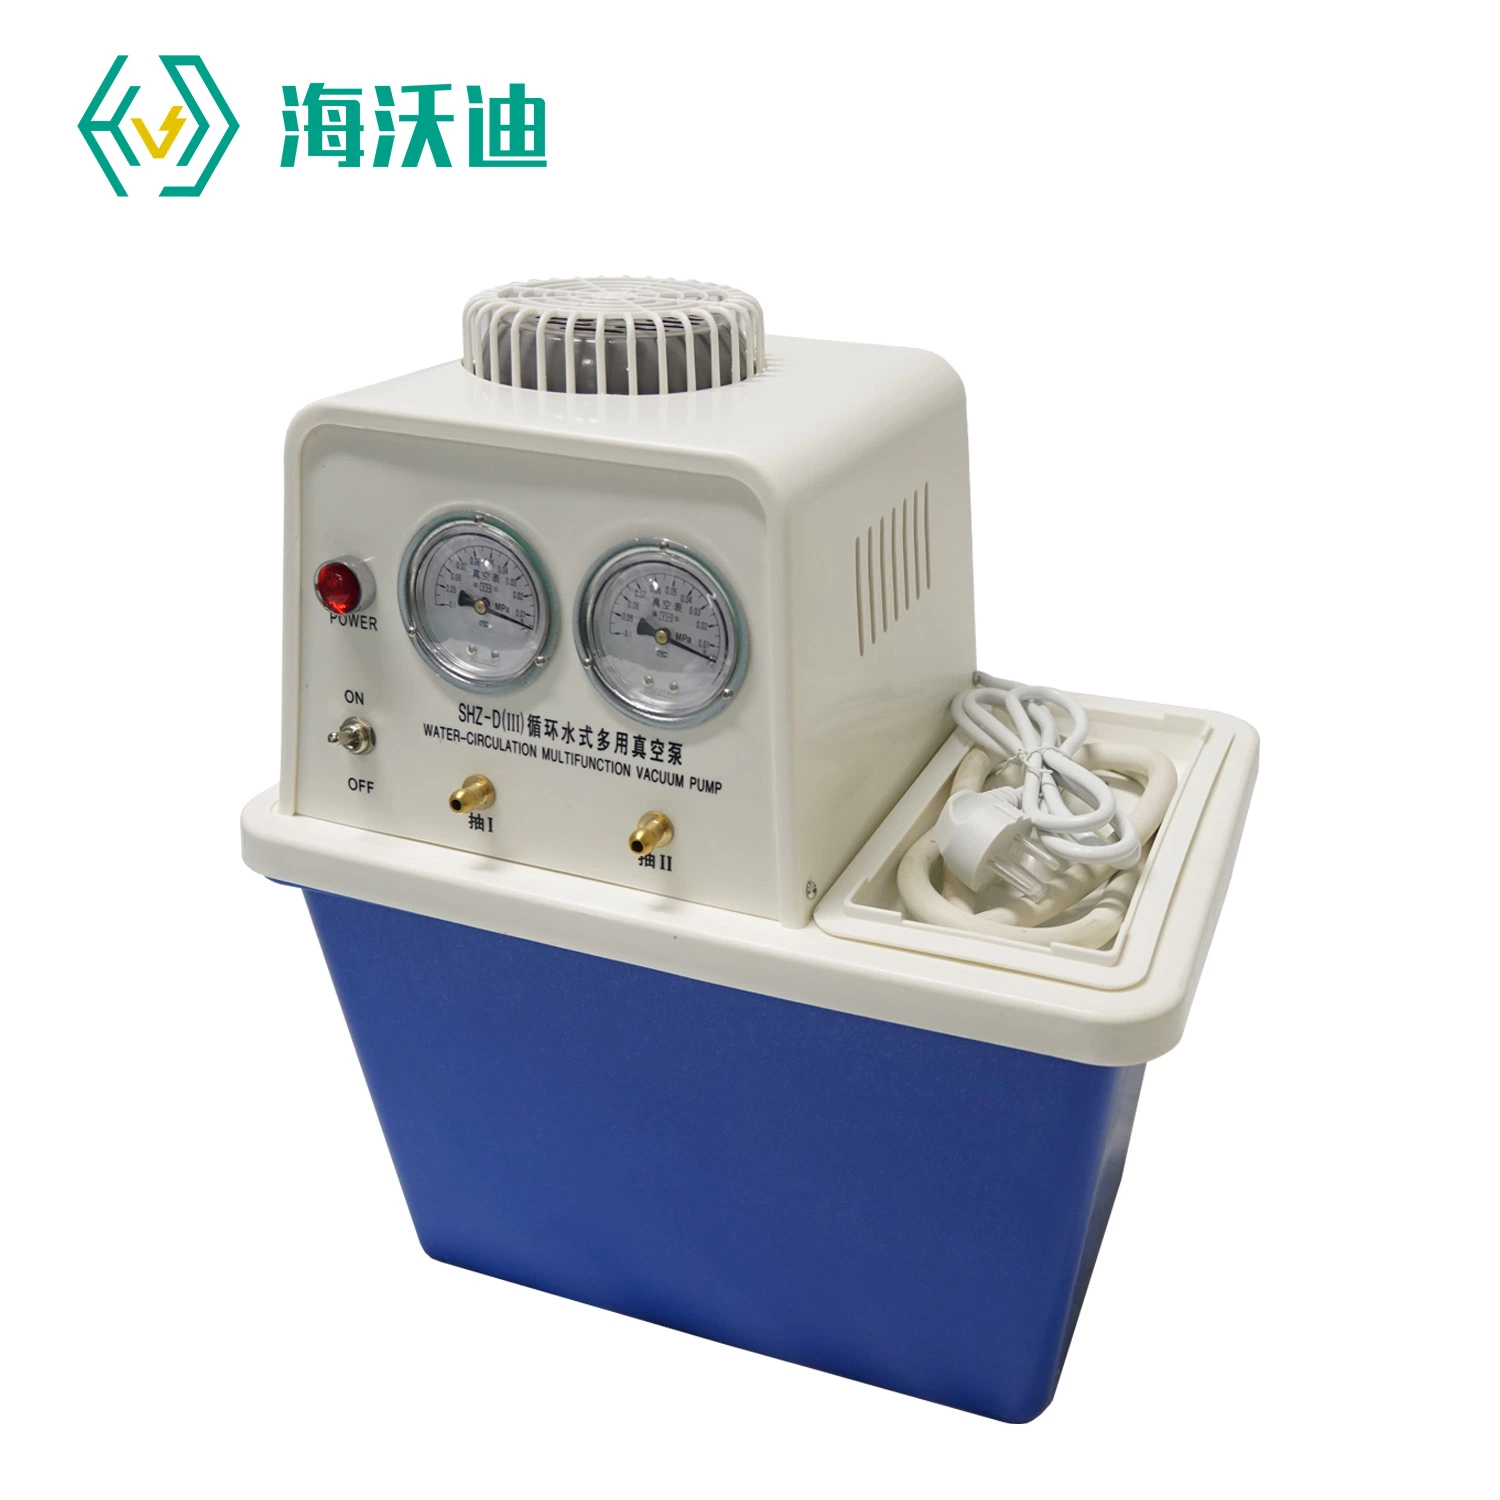 Insulator Equivalent Gray Density Value Calibration and Testing Instruments Insulator Obscurity Measuring Instrument